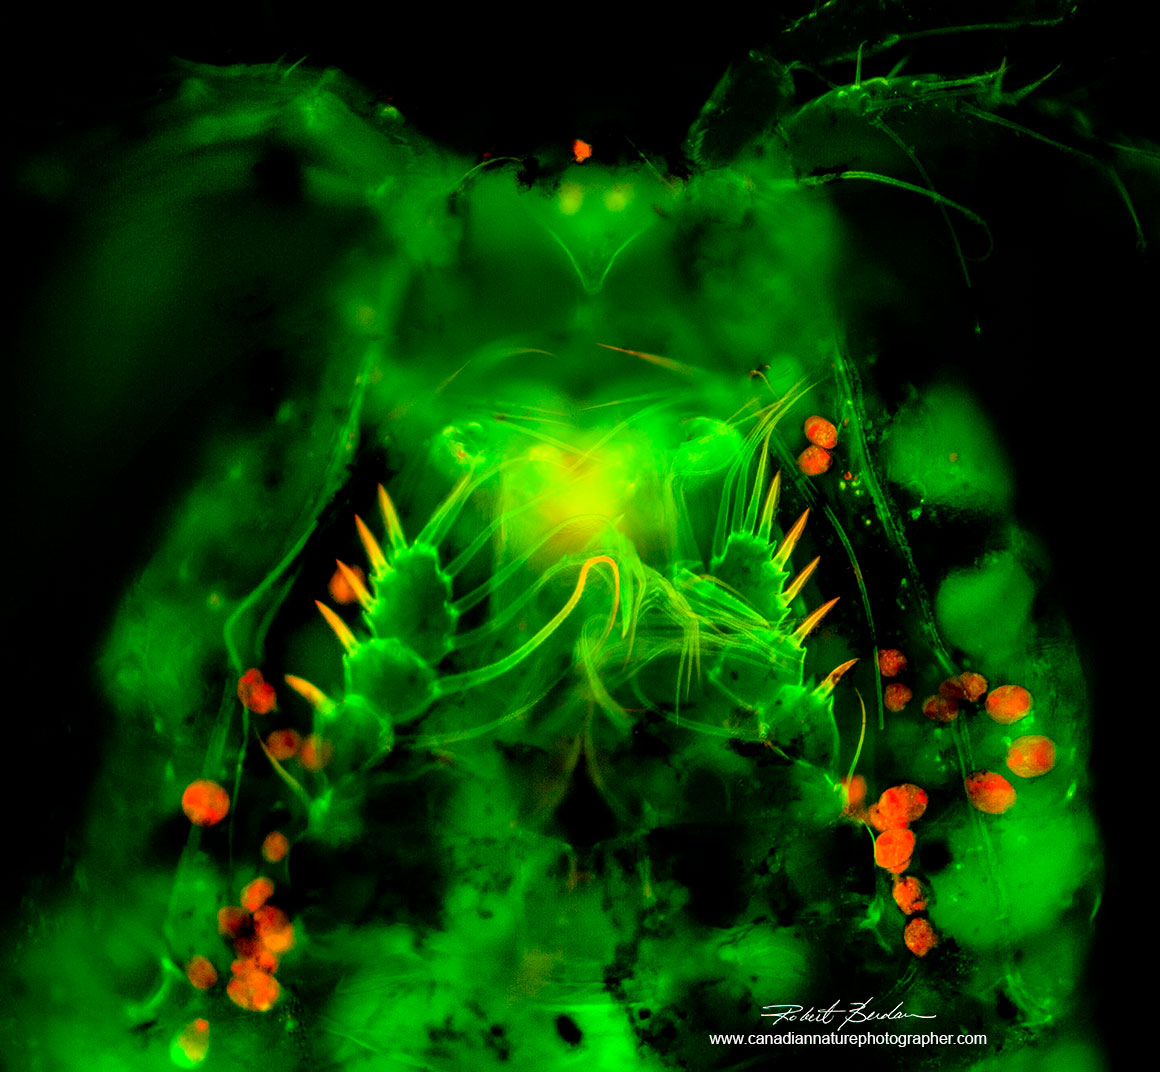 Ventral surface of Cyclopoid after staining with Acridine orange 200X fluorescence microscopy by Robert Berdan ©